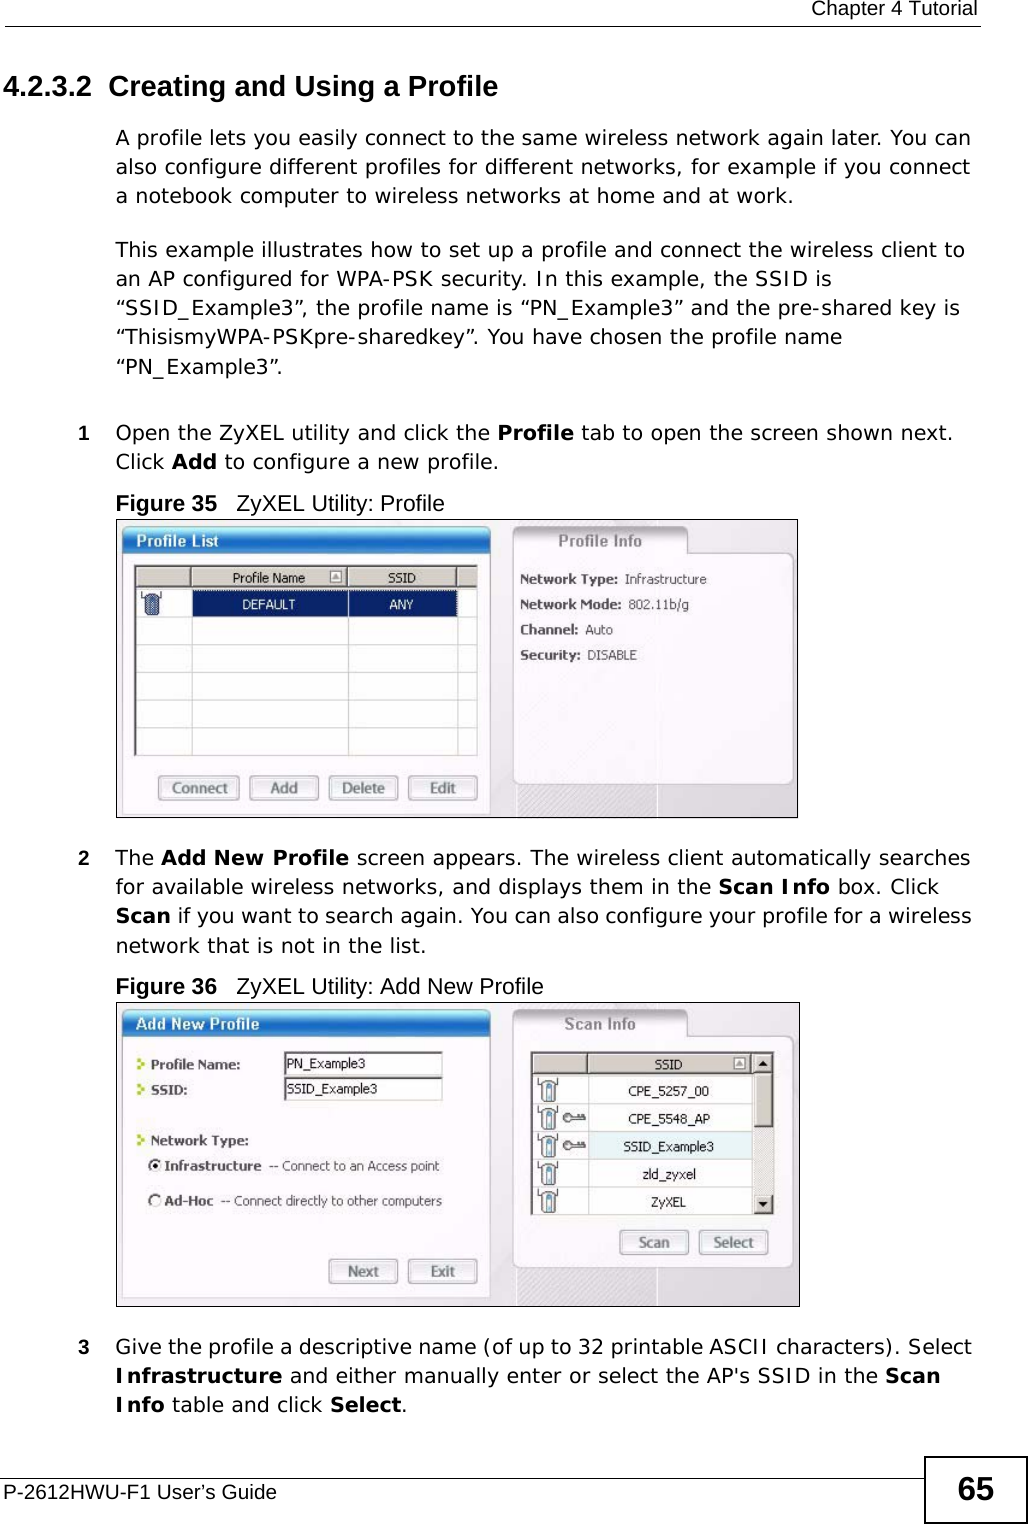  Chapter 4 TutorialP-2612HWU-F1 User’s Guide 654.2.3.2  Creating and Using a ProfileA profile lets you easily connect to the same wireless network again later. You can also configure different profiles for different networks, for example if you connect a notebook computer to wireless networks at home and at work. This example illustrates how to set up a profile and connect the wireless client to an AP configured for WPA-PSK security. In this example, the SSID is “SSID_Example3”, the profile name is “PN_Example3” and the pre-shared key is “ThisismyWPA-PSKpre-sharedkey”. You have chosen the profile name “PN_Example3”.1Open the ZyXEL utility and click the Profile tab to open the screen shown next. Click Add to configure a new profile.Figure 35   ZyXEL Utility: Profile2The Add New Profile screen appears. The wireless client automatically searches for available wireless networks, and displays them in the Scan Info box. Click Scan if you want to search again. You can also configure your profile for a wireless network that is not in the list.Figure 36   ZyXEL Utility: Add New Profile3Give the profile a descriptive name (of up to 32 printable ASCII characters). Select Infrastructure and either manually enter or select the AP&apos;s SSID in the Scan Info table and click Select.